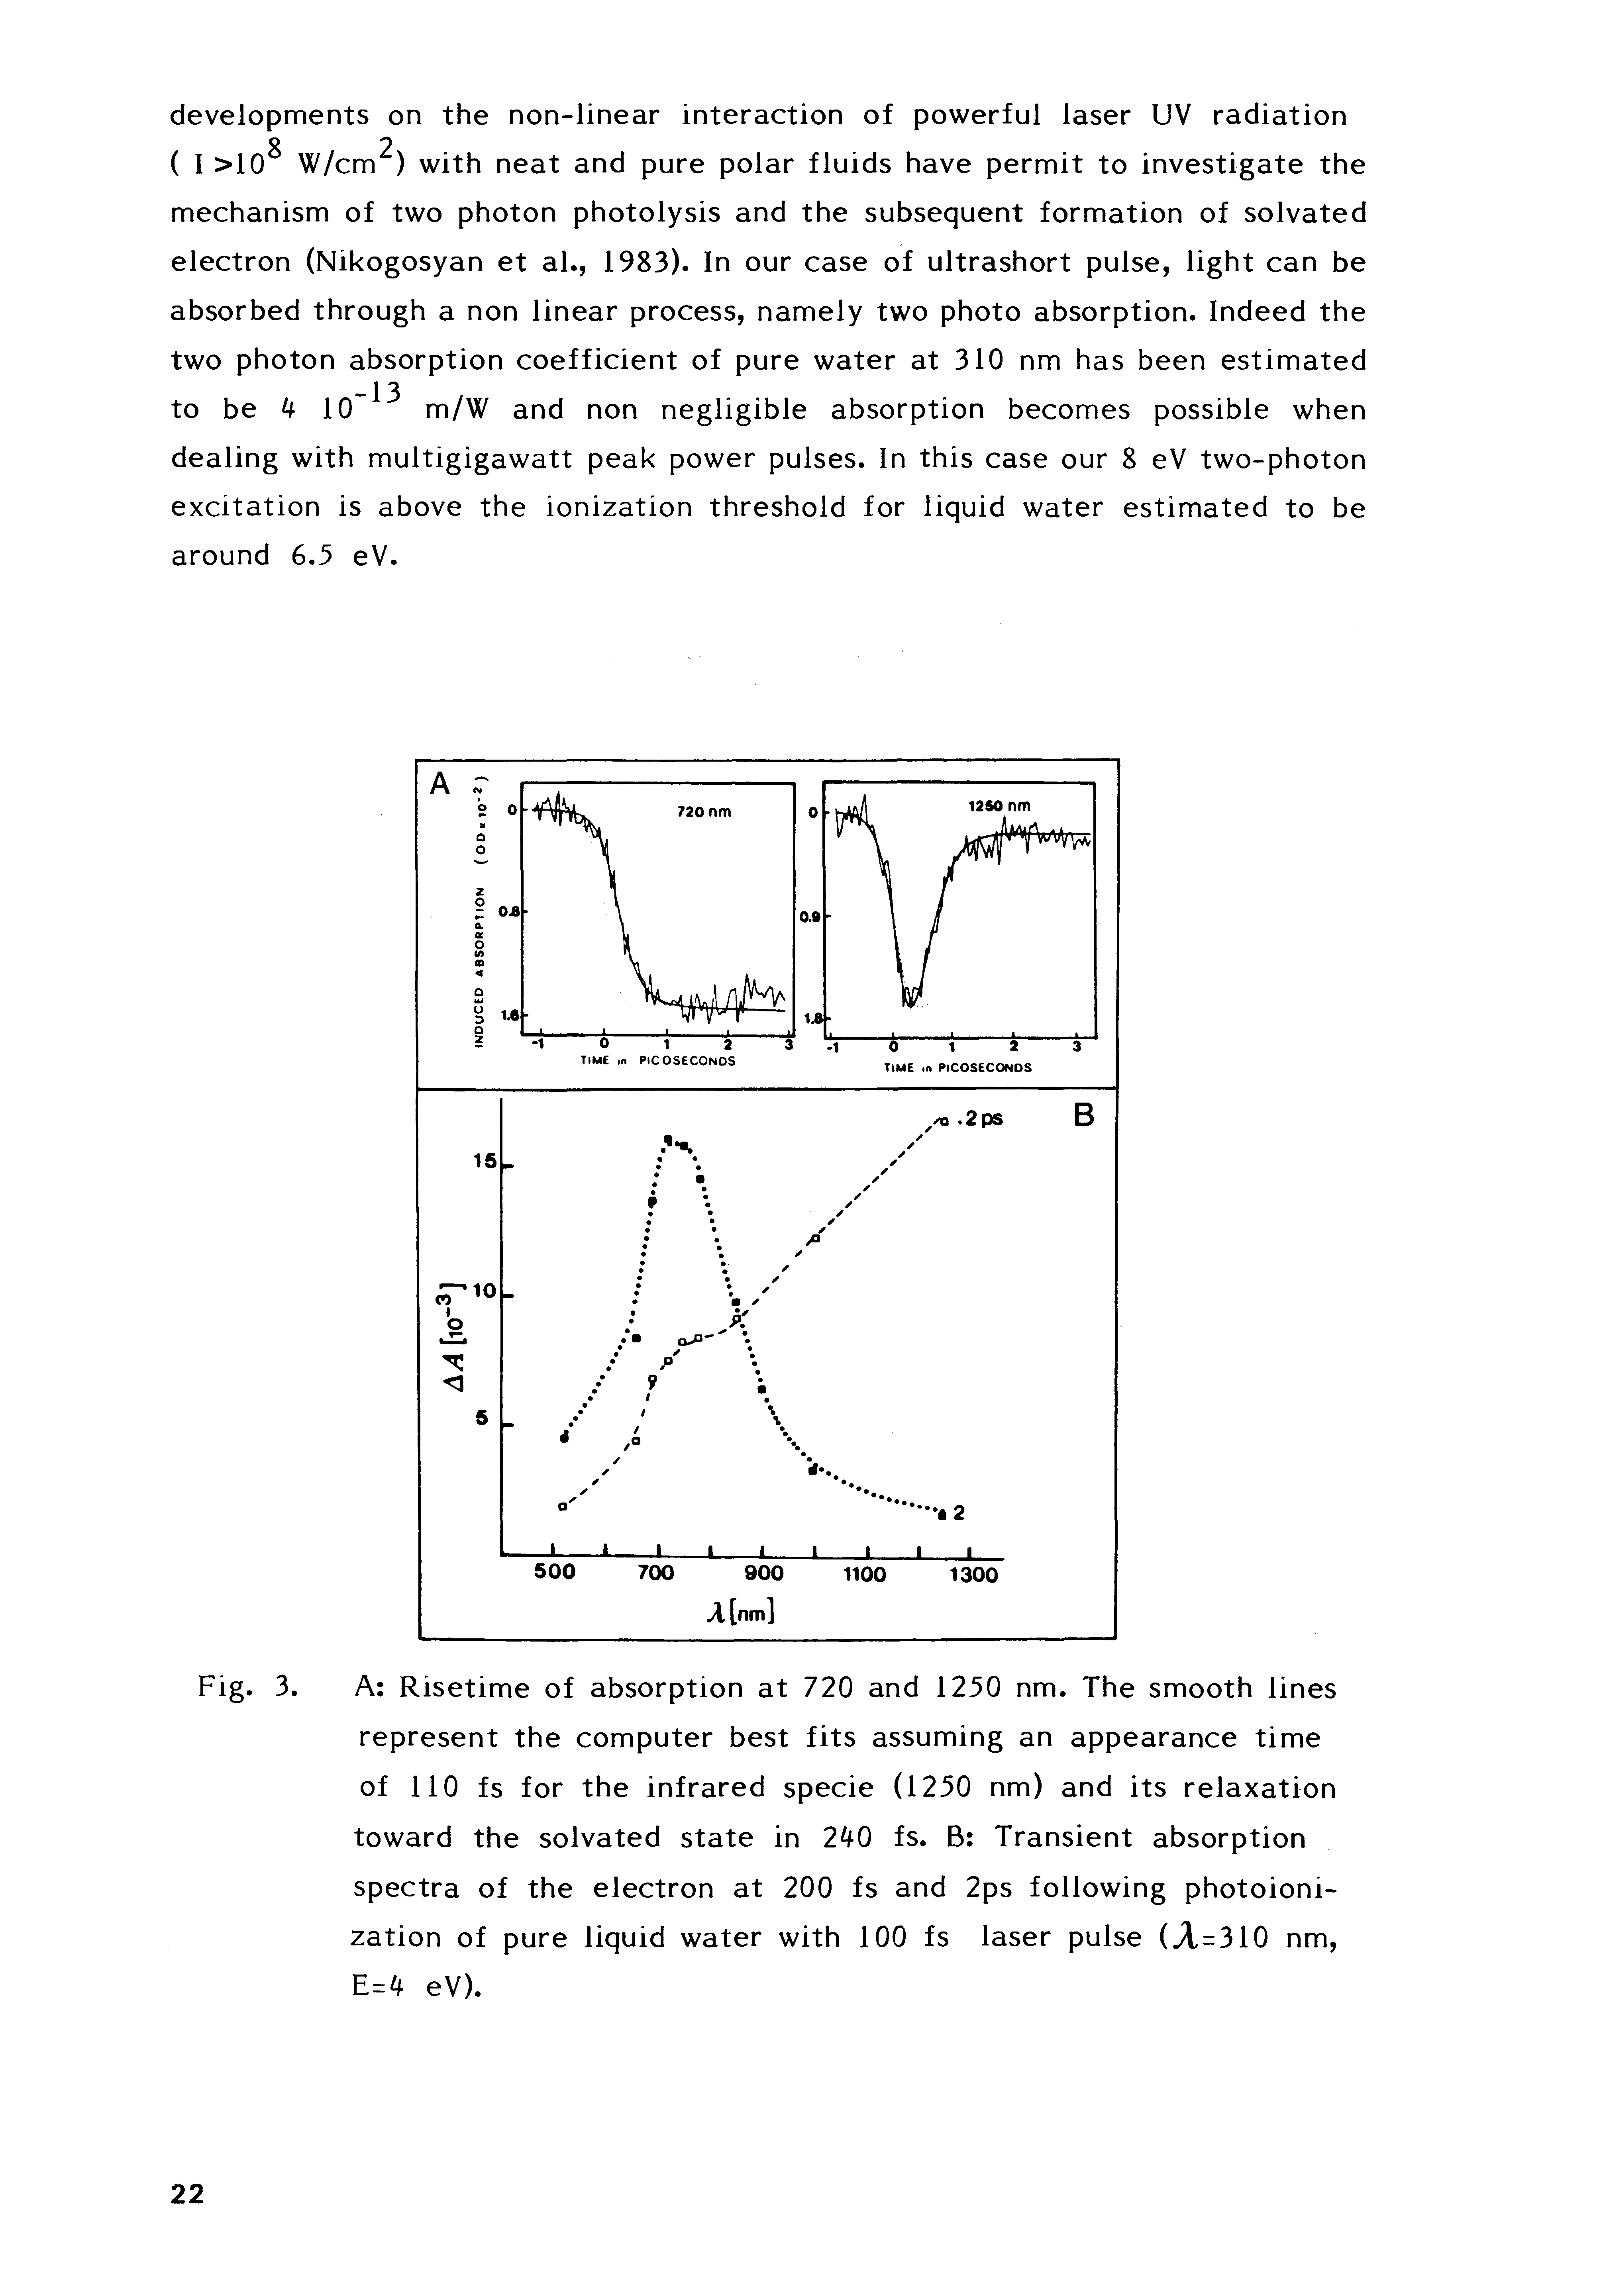 Fig. 3. A Risetime of absorption at 720 and 1230 nm. The smooth lines represent the computer best fits assuming an appearance time of 110 fs for the infrared specie (1230 nm) and its relaxation toward the solvated state in 2 0 fs. B Transient absorption spectra of the electron at 200 fs and 2ps following photoionization of pure liquid water with 100 fs laser pulse (A=310 nm, eV).